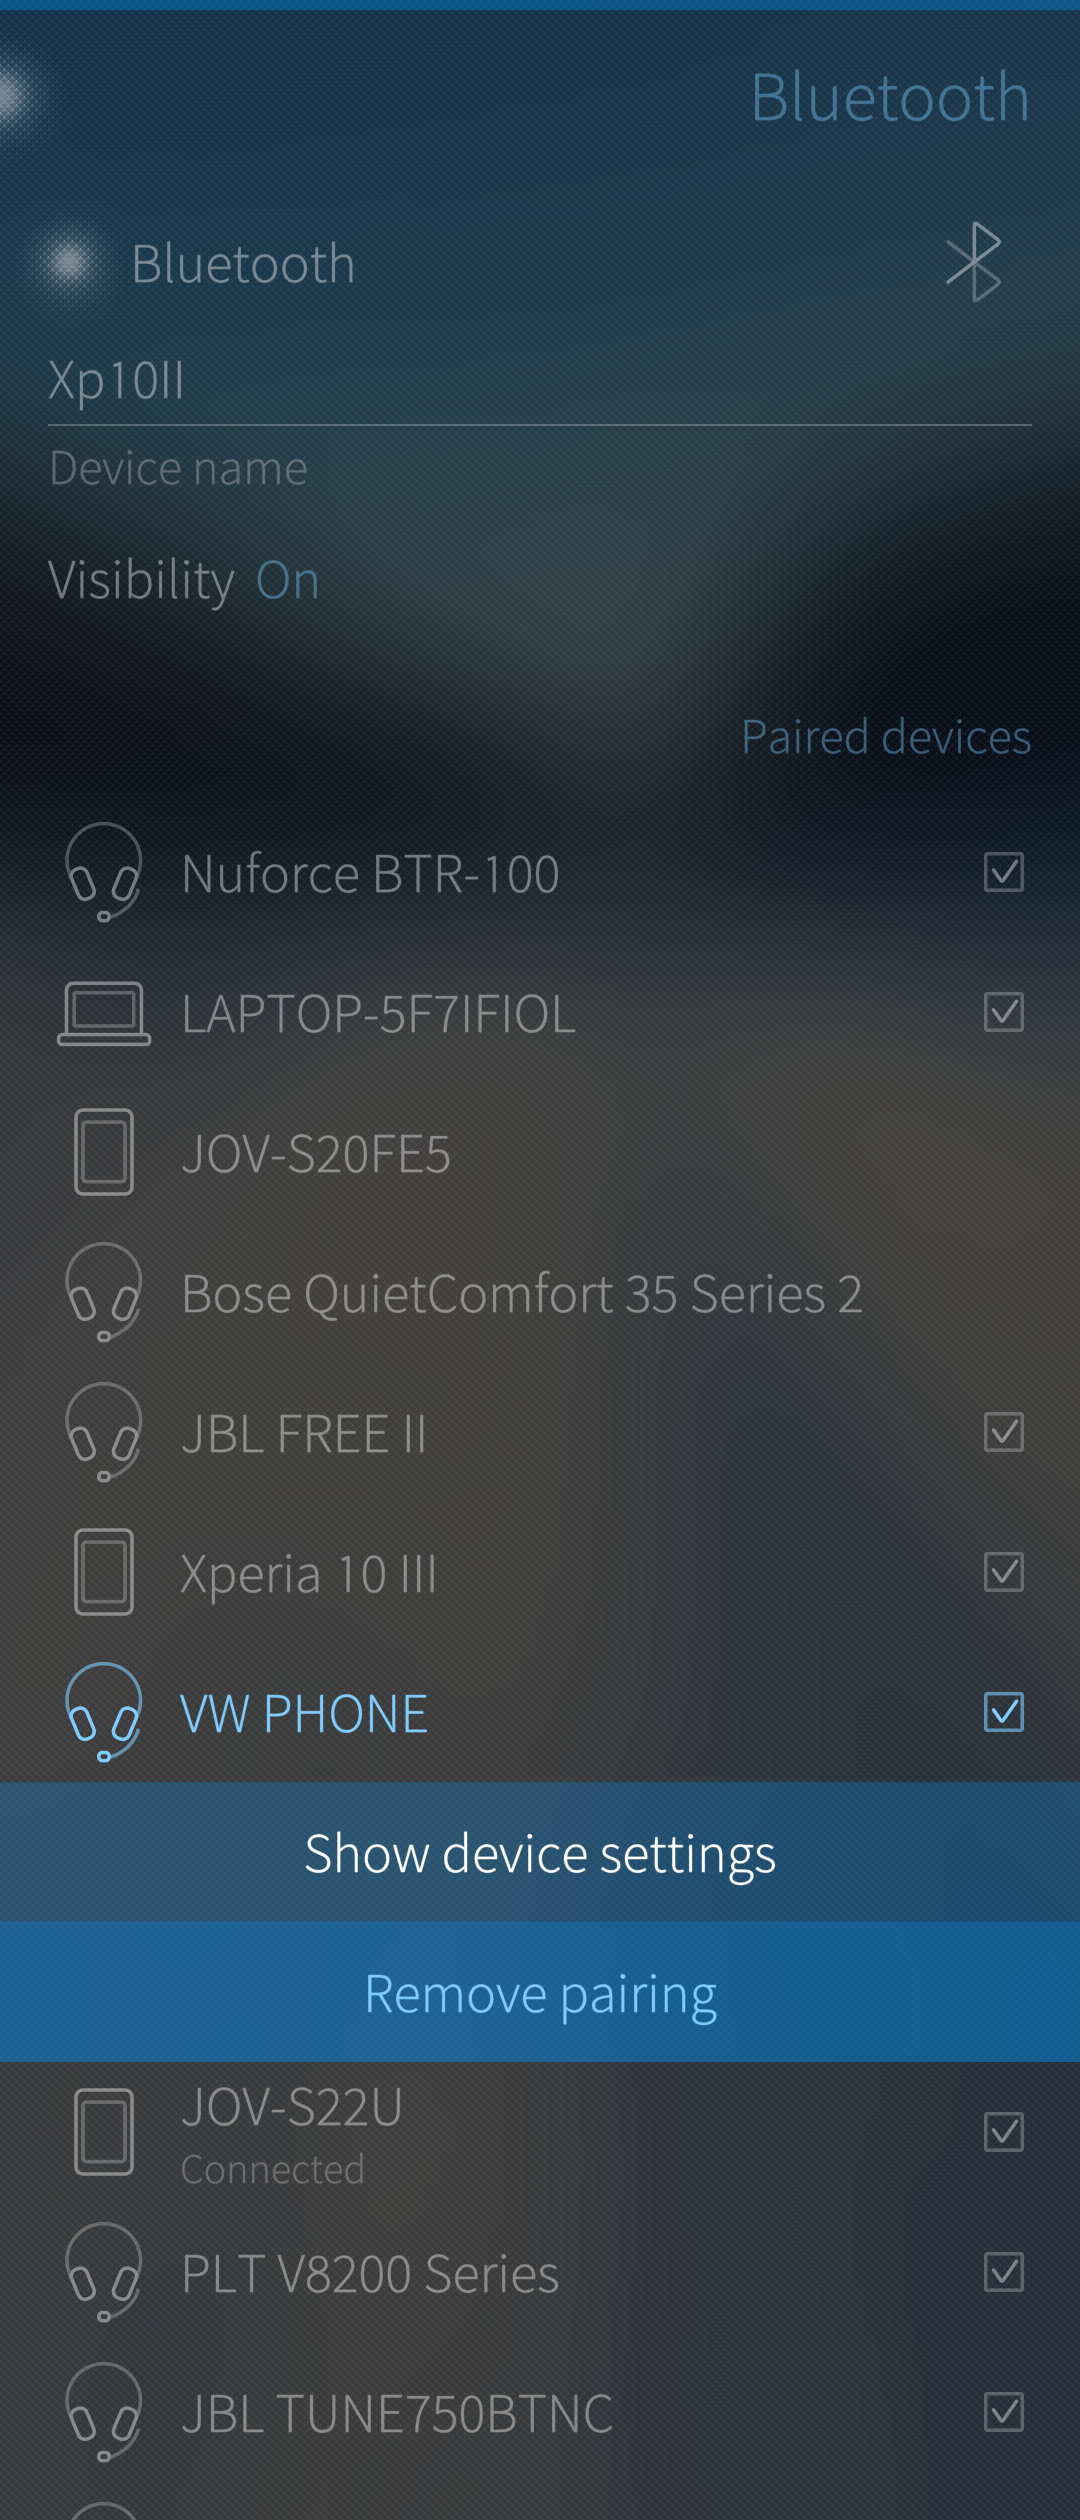 Remove paired device